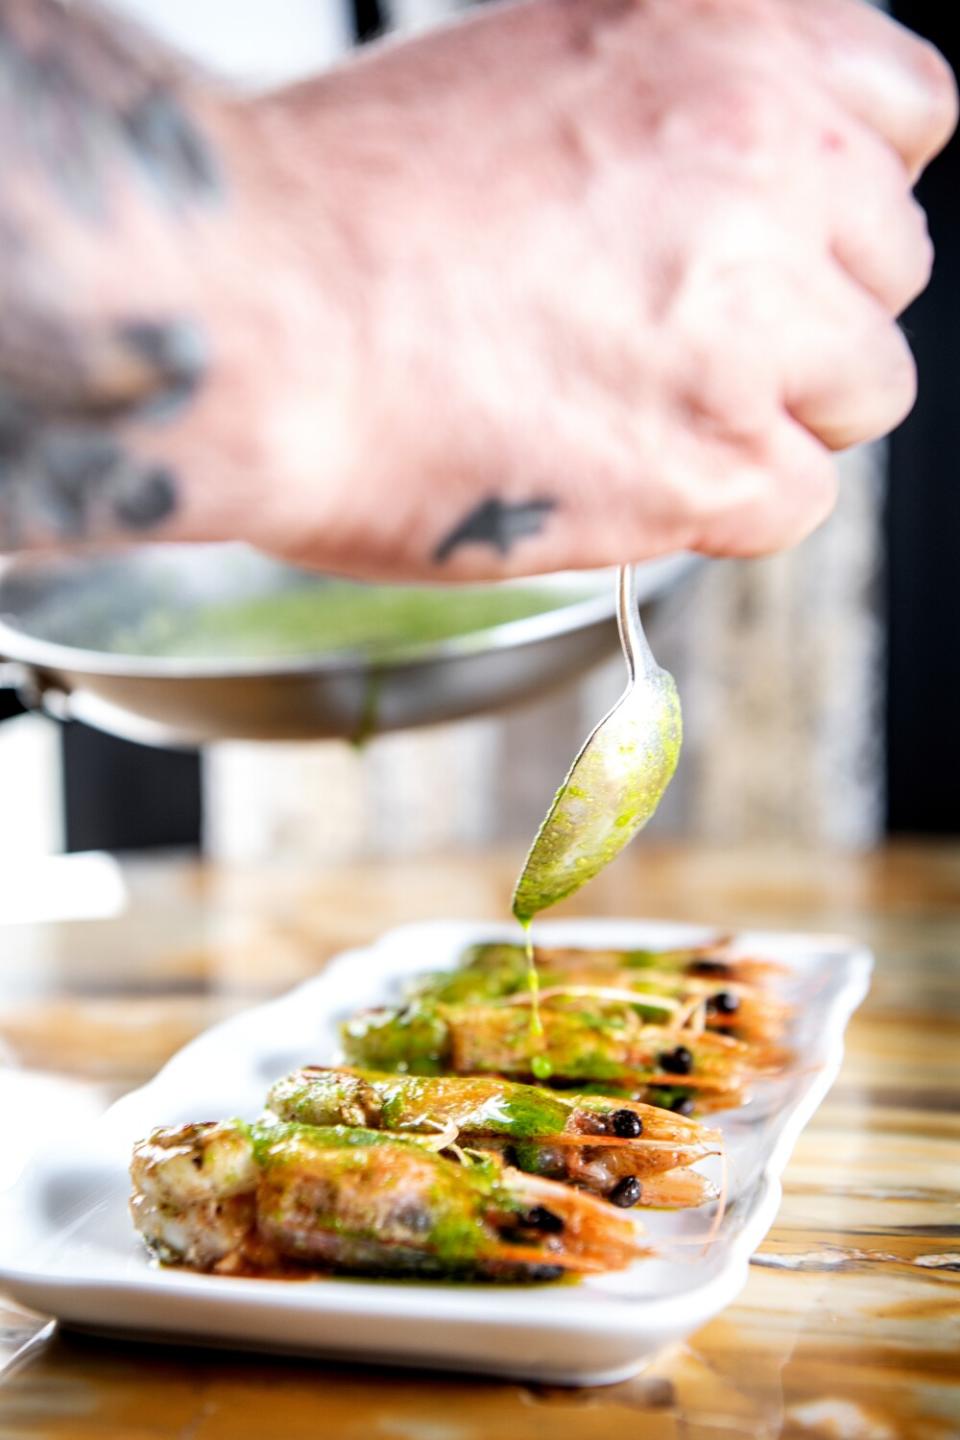 A hand holding a spoon drizzles salsa verde onto prawns.